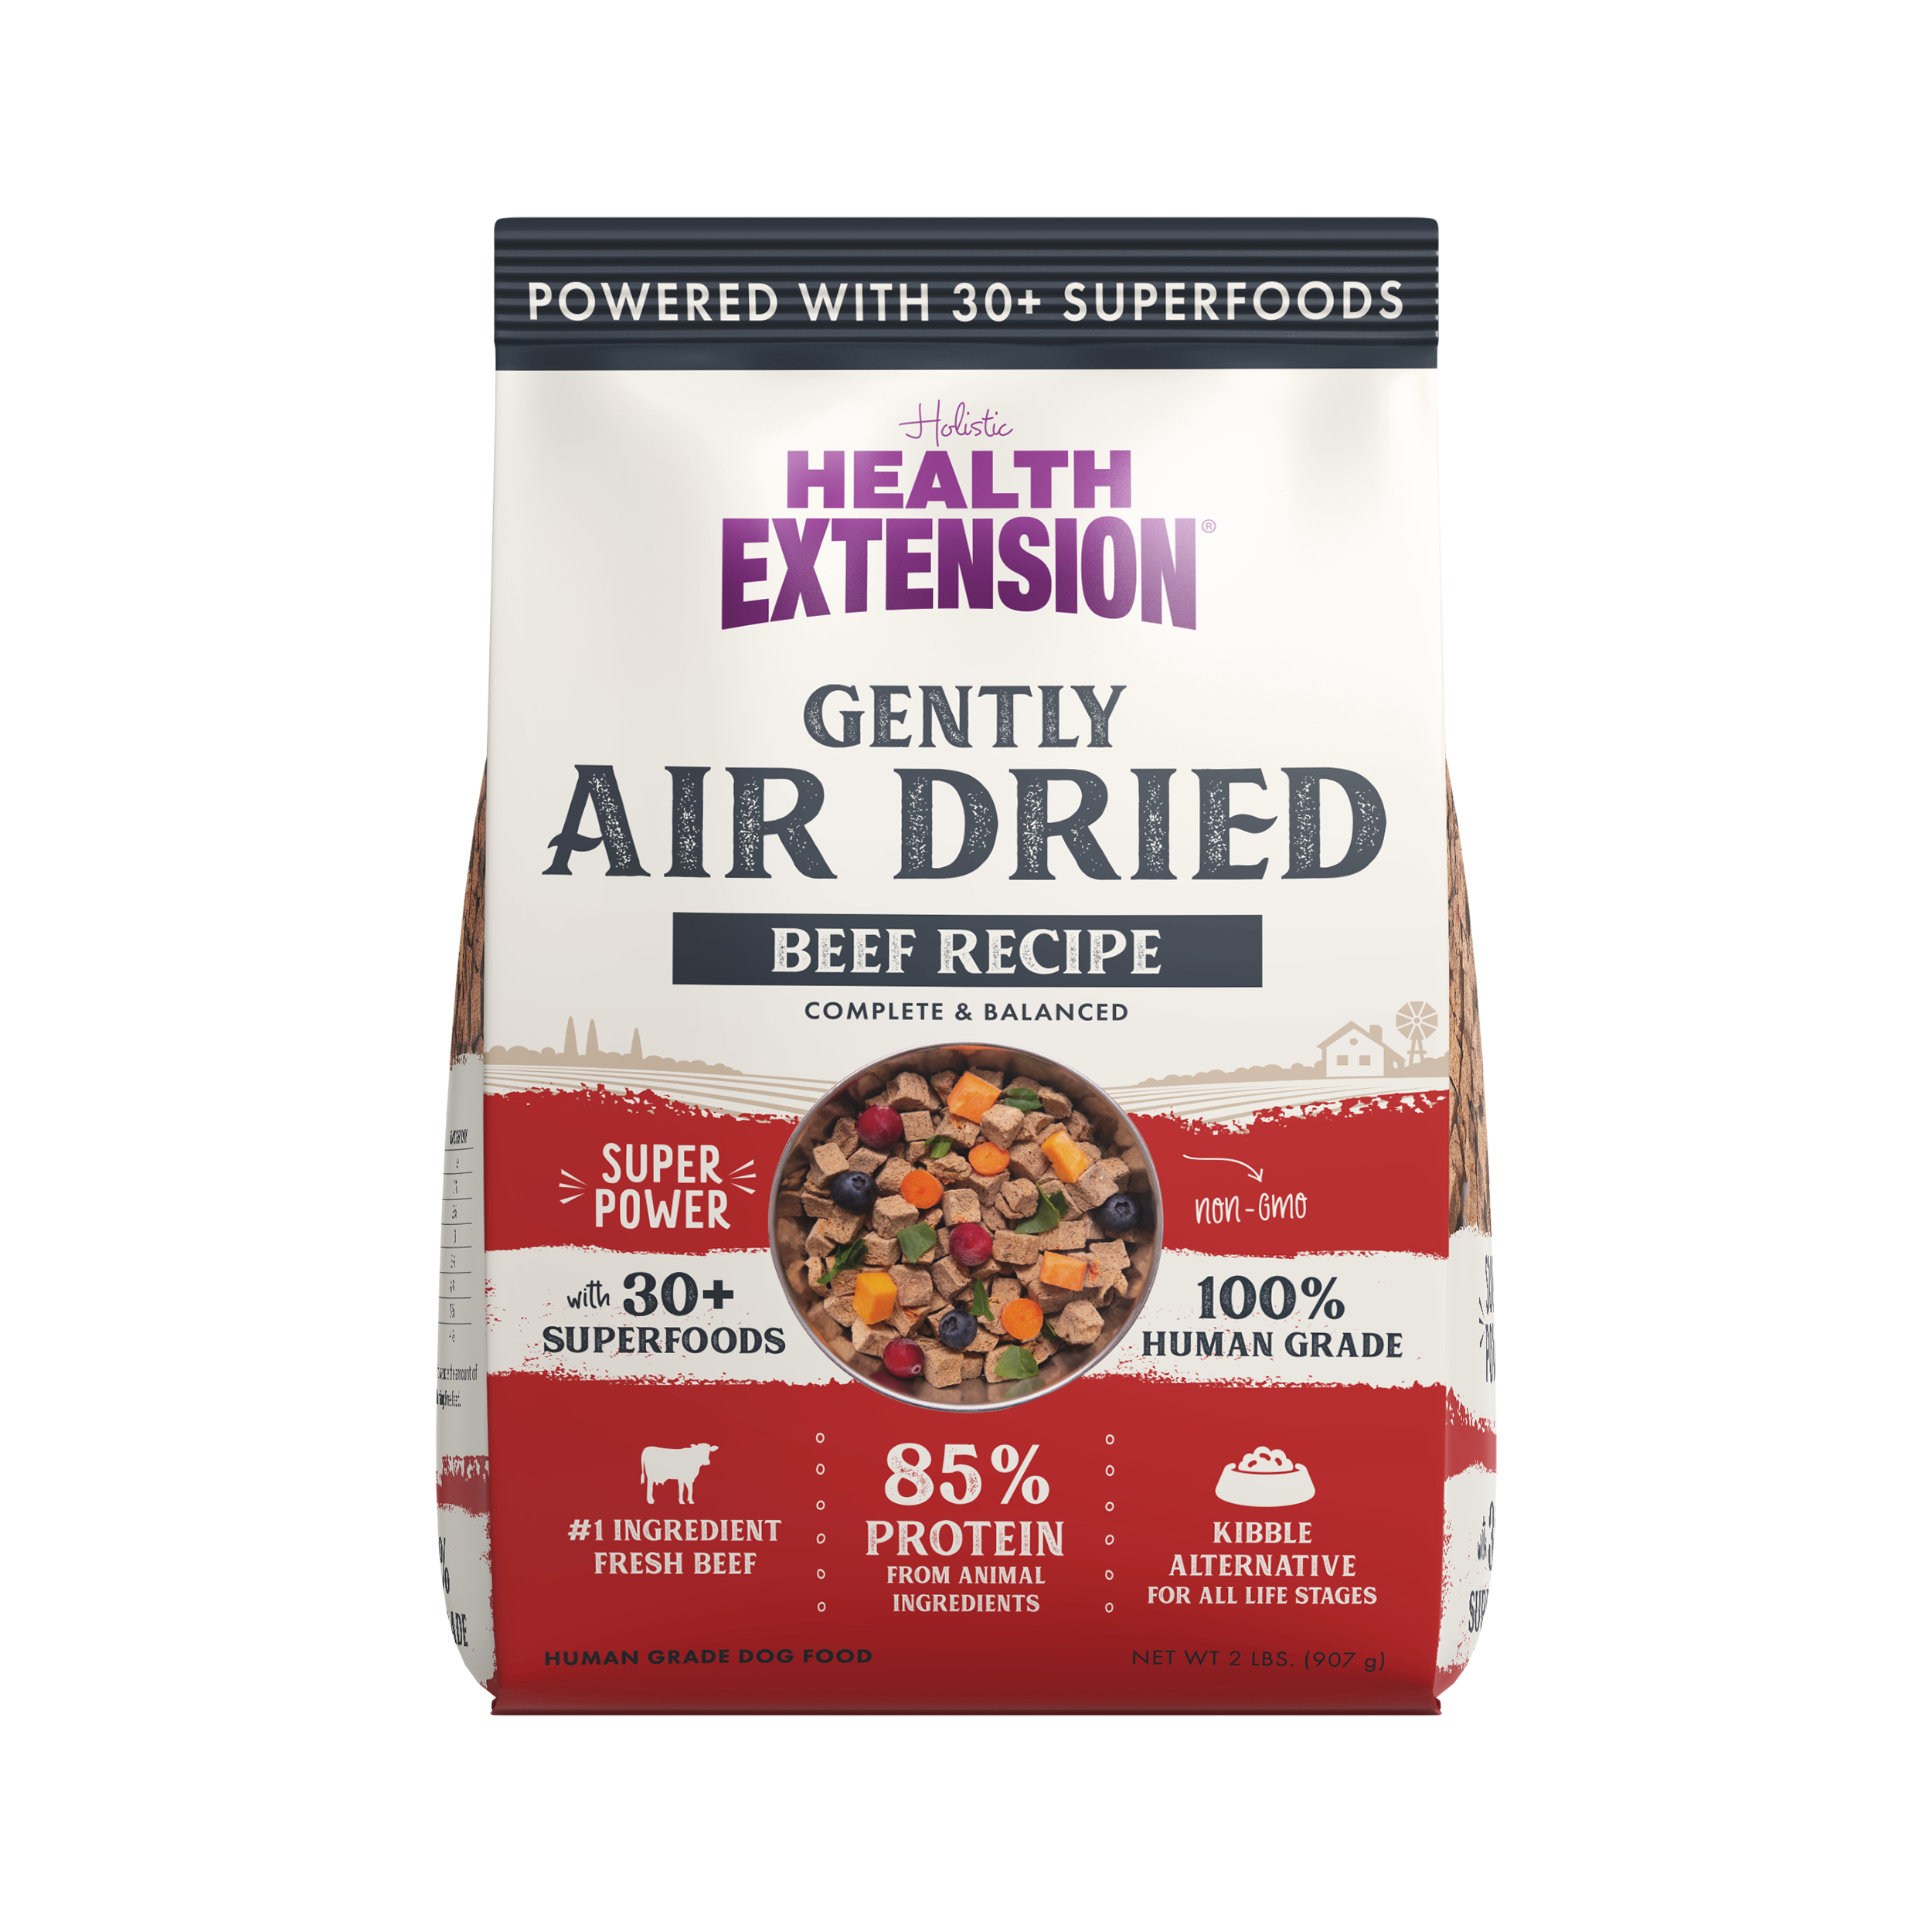 Packaging of Health Extension Gently Air Dried Beef Recipe dog food, emphasizing key features such as being powered with over 30+ superfoods, containing 85% protein from animal ingredients, and being a 100% human-grade kibble alternative for all life stages. The front view shows the product name, a window displaying the air-dried food, and badges highlighting the #1 ingredient as fresh chicken, non-GMO, and suitable for all life stages.